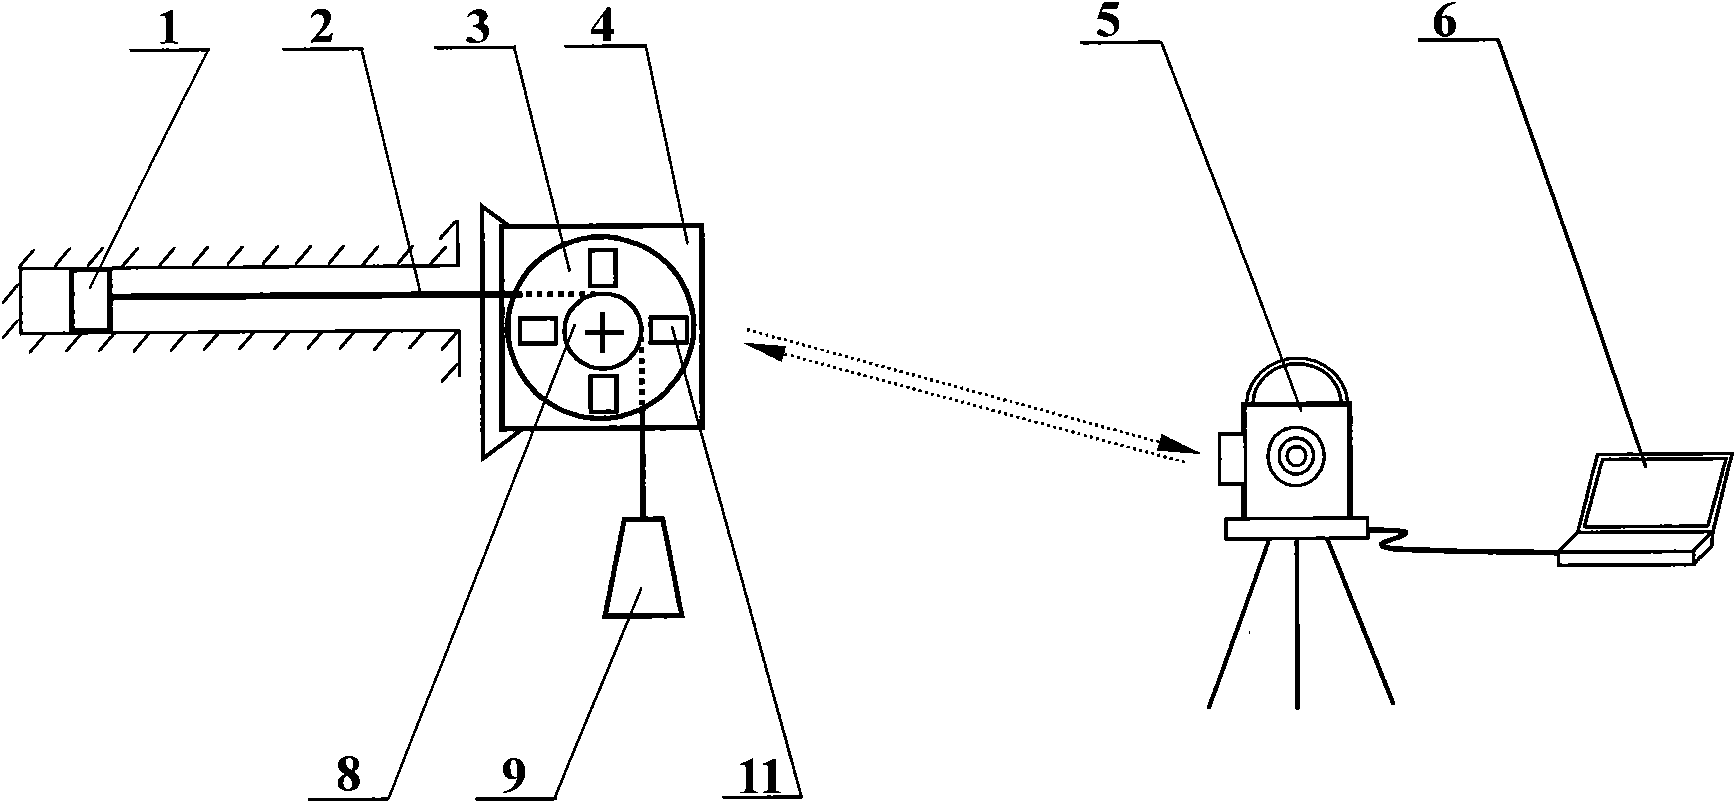 Optical observation device of deformation in surrounding rock